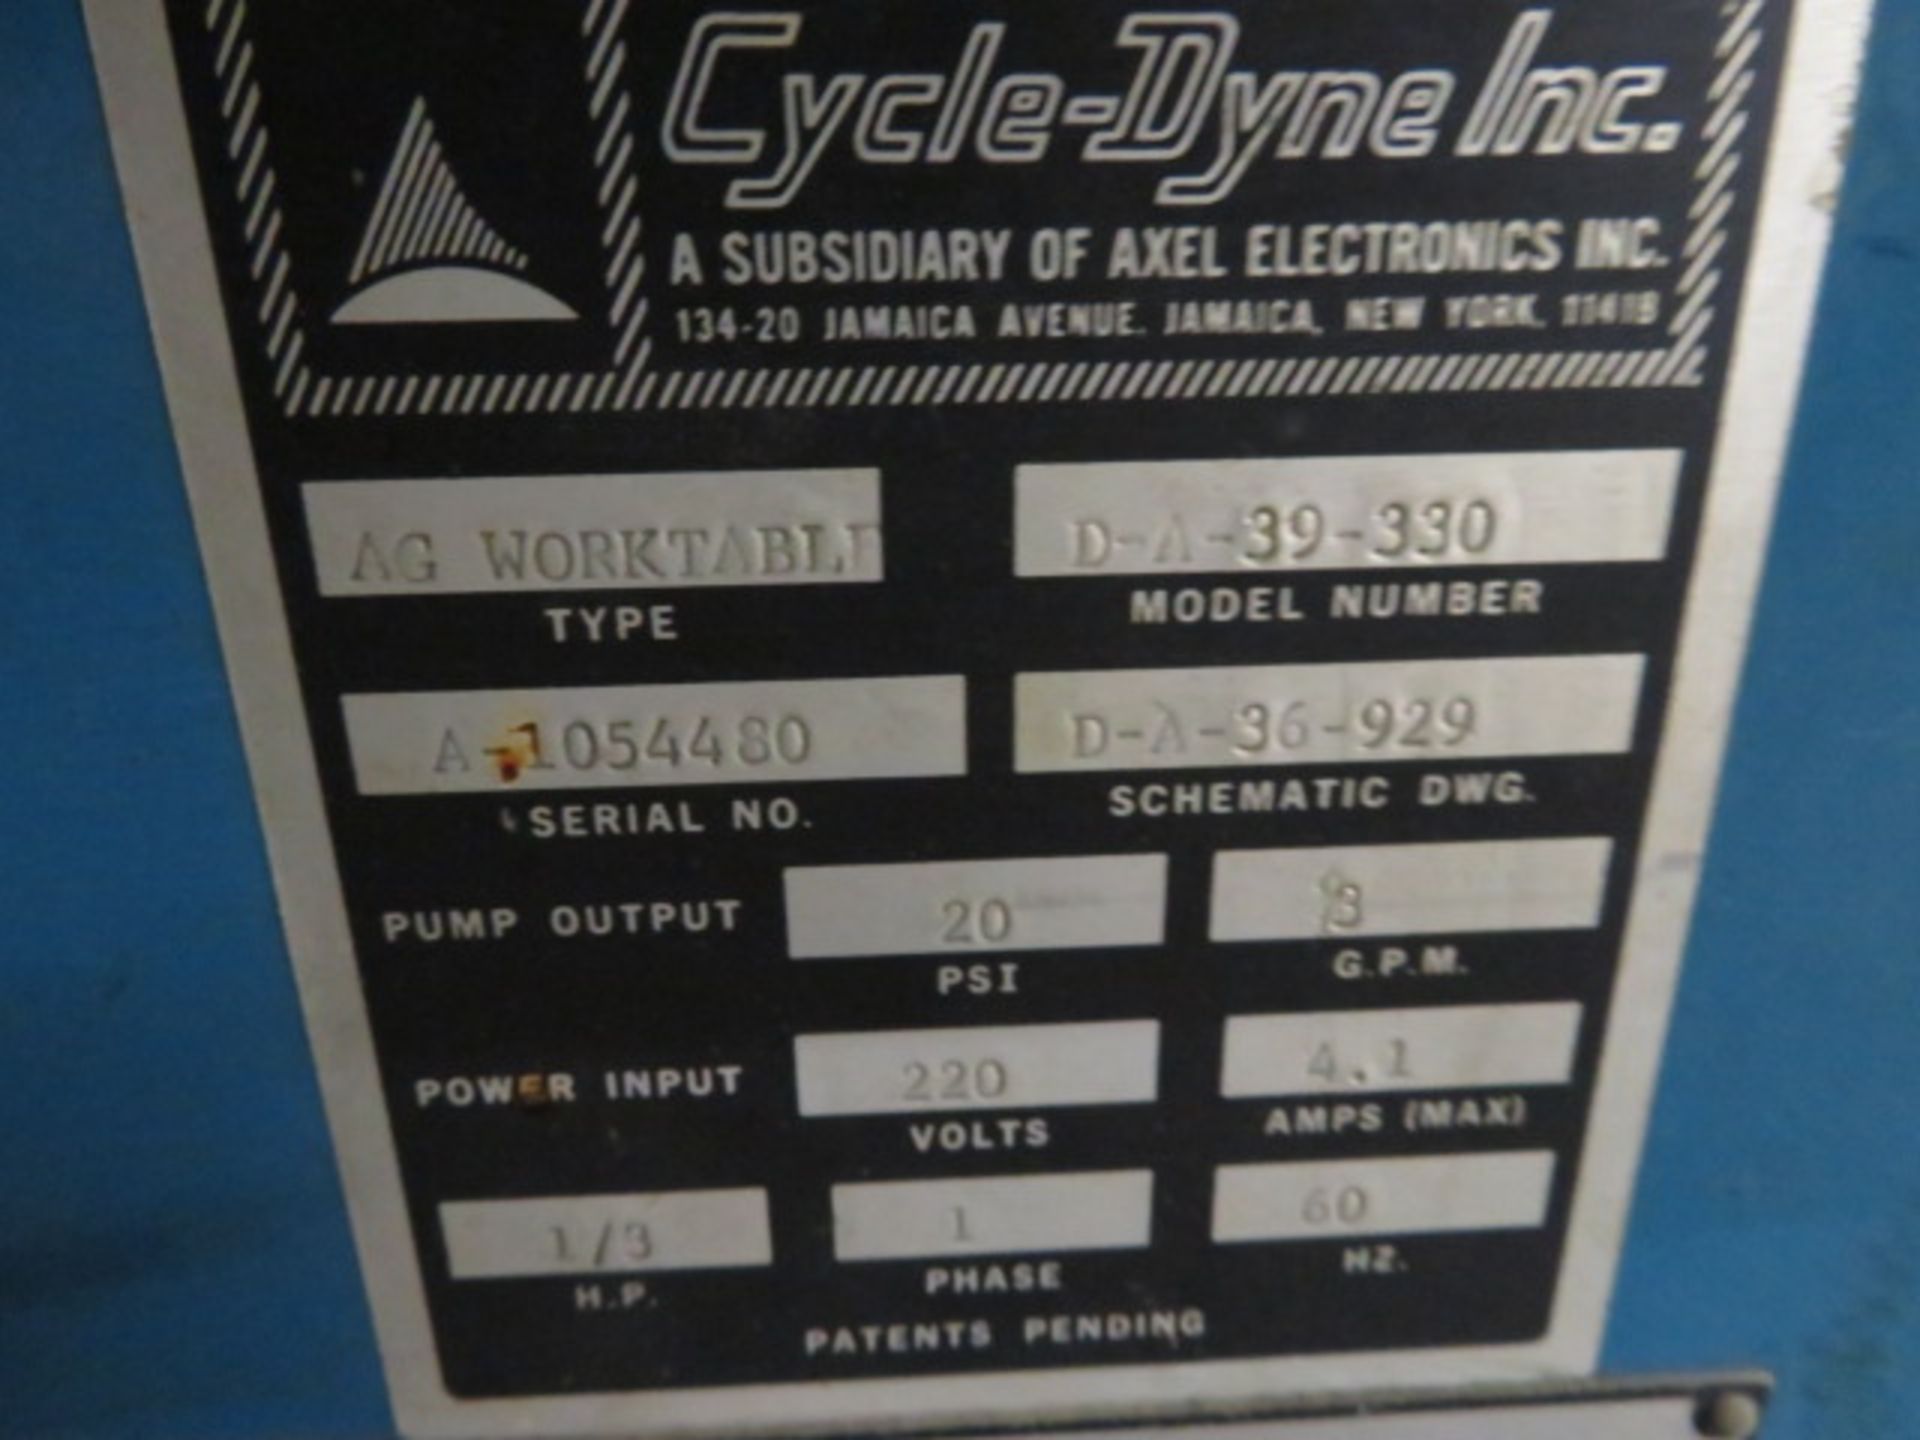 CYCLE-DYNE MDL. D-A-39-451 INDUCTION BRAZING W/AG WORKTABLE - Image 2 of 2